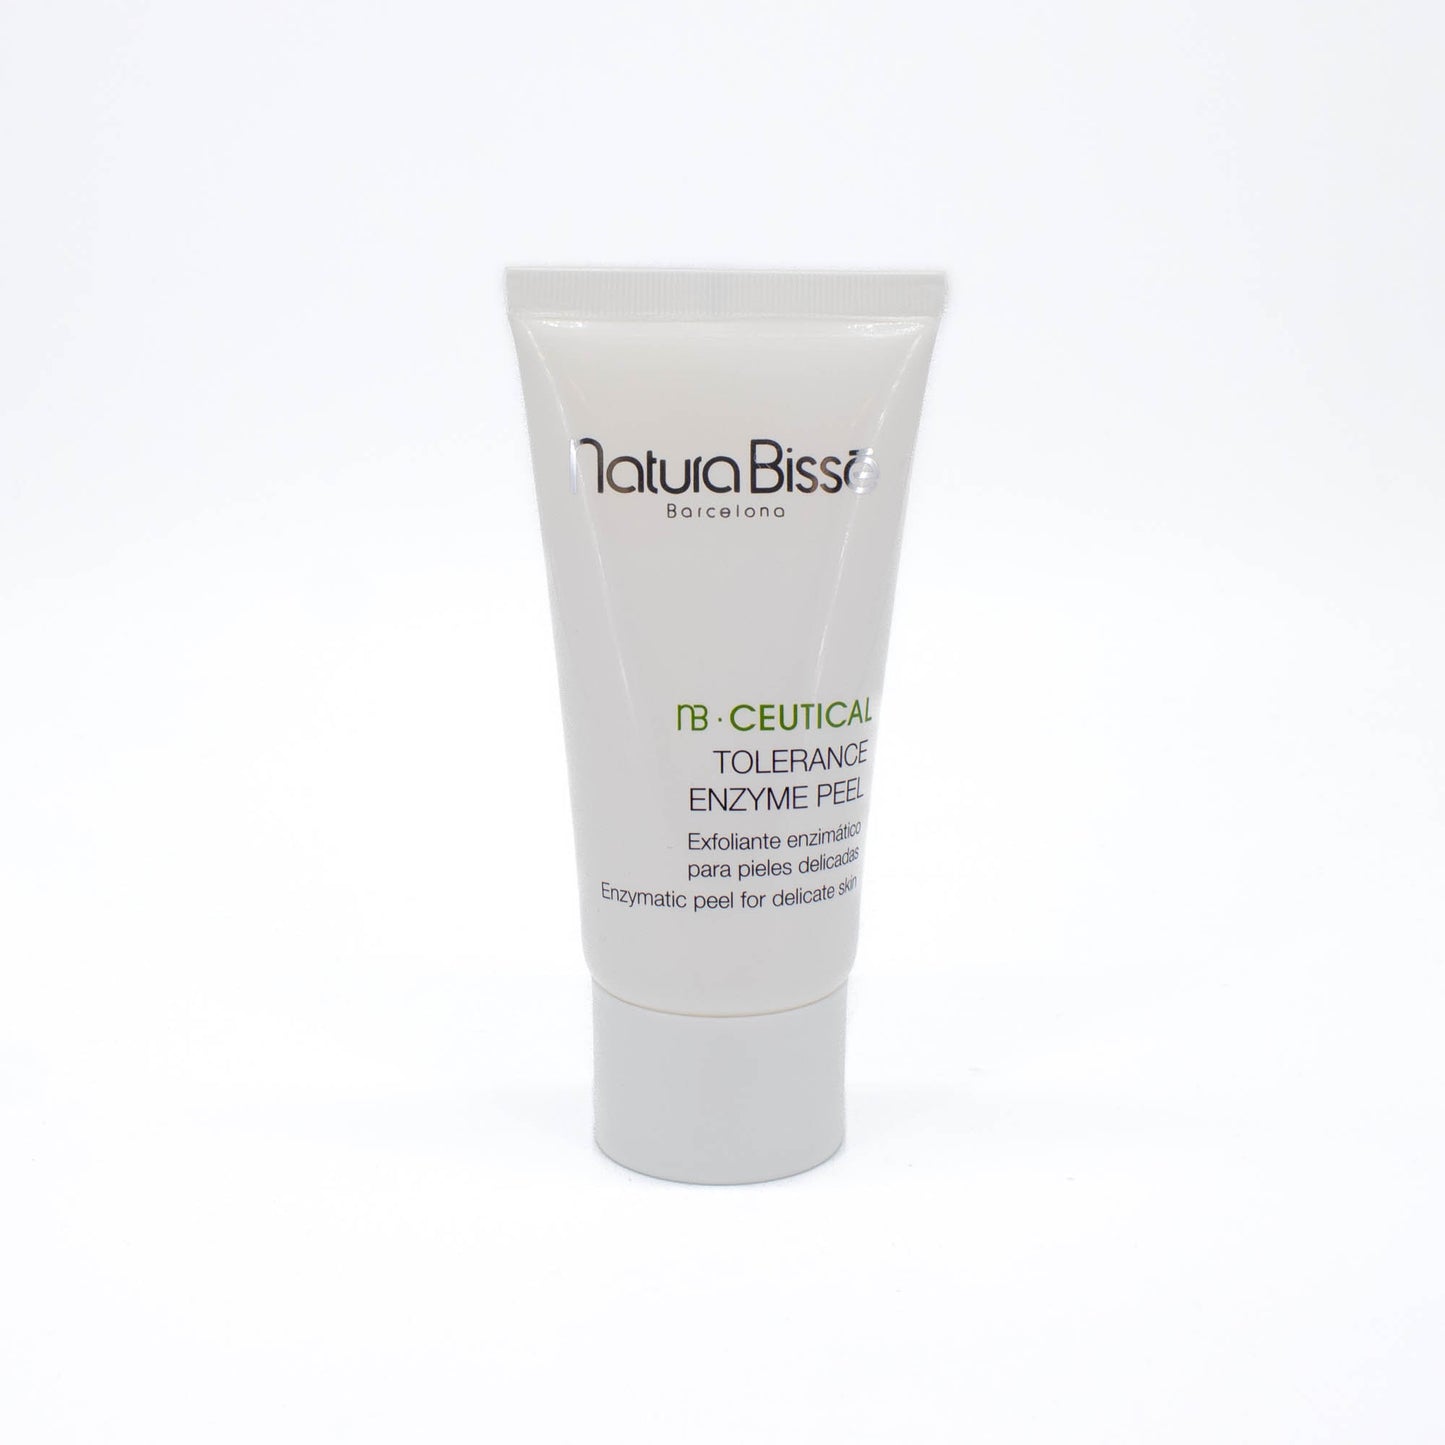 Natura Bisse NB-Ceutical Tolerance Enzyme Peel 1.7oz - Small Amount Missing